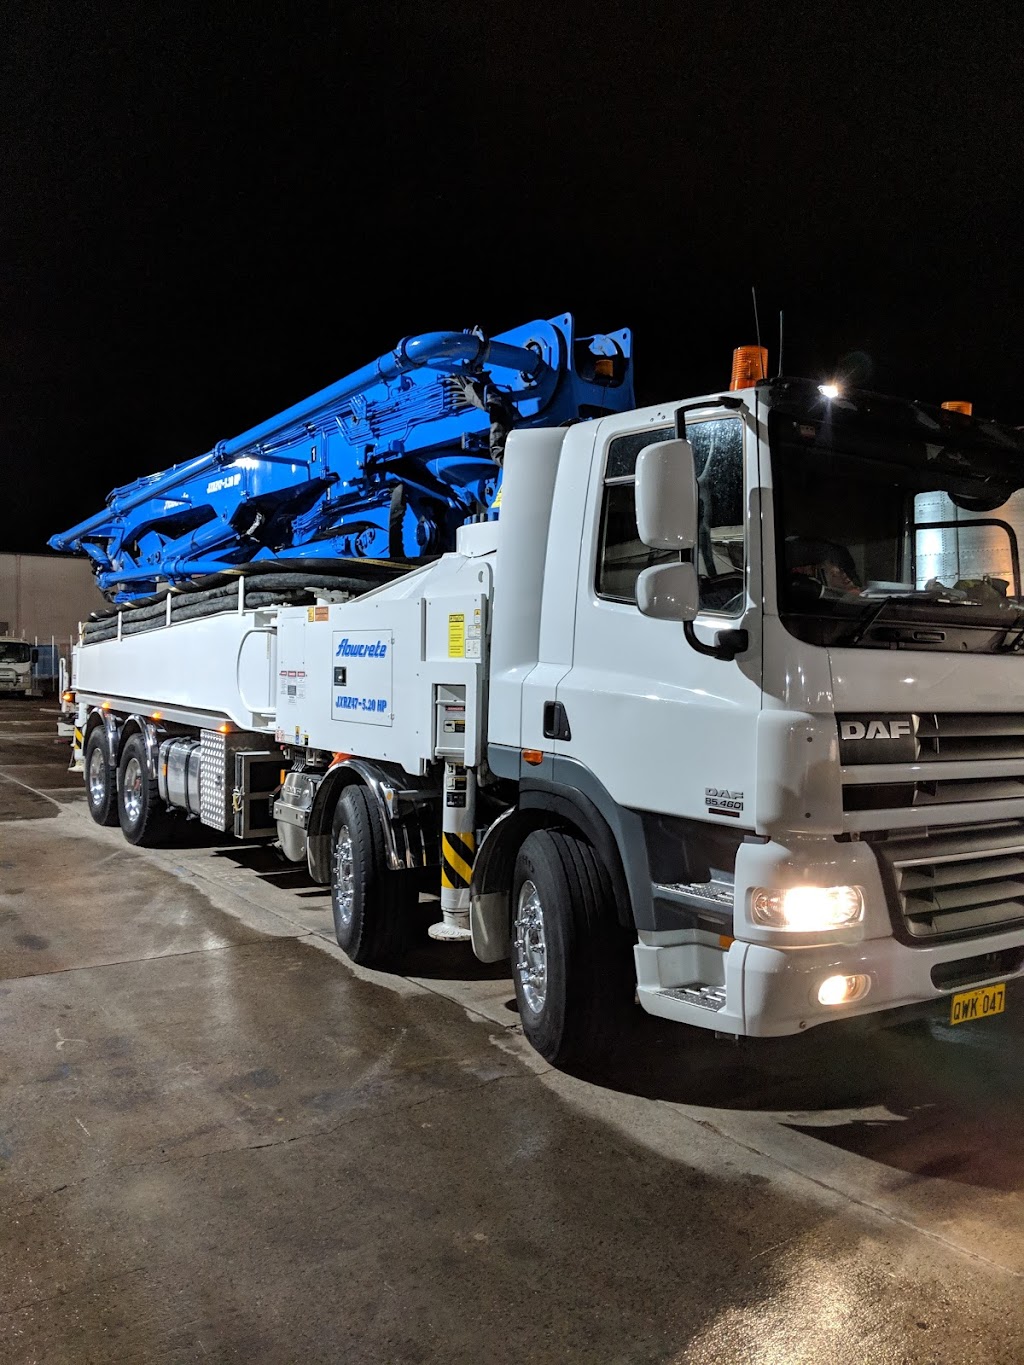 Dimond Brothers Concrete Pumping | 1 Rickaby St, South Windsor NSW 2756, Australia | Phone: 0478 650 644